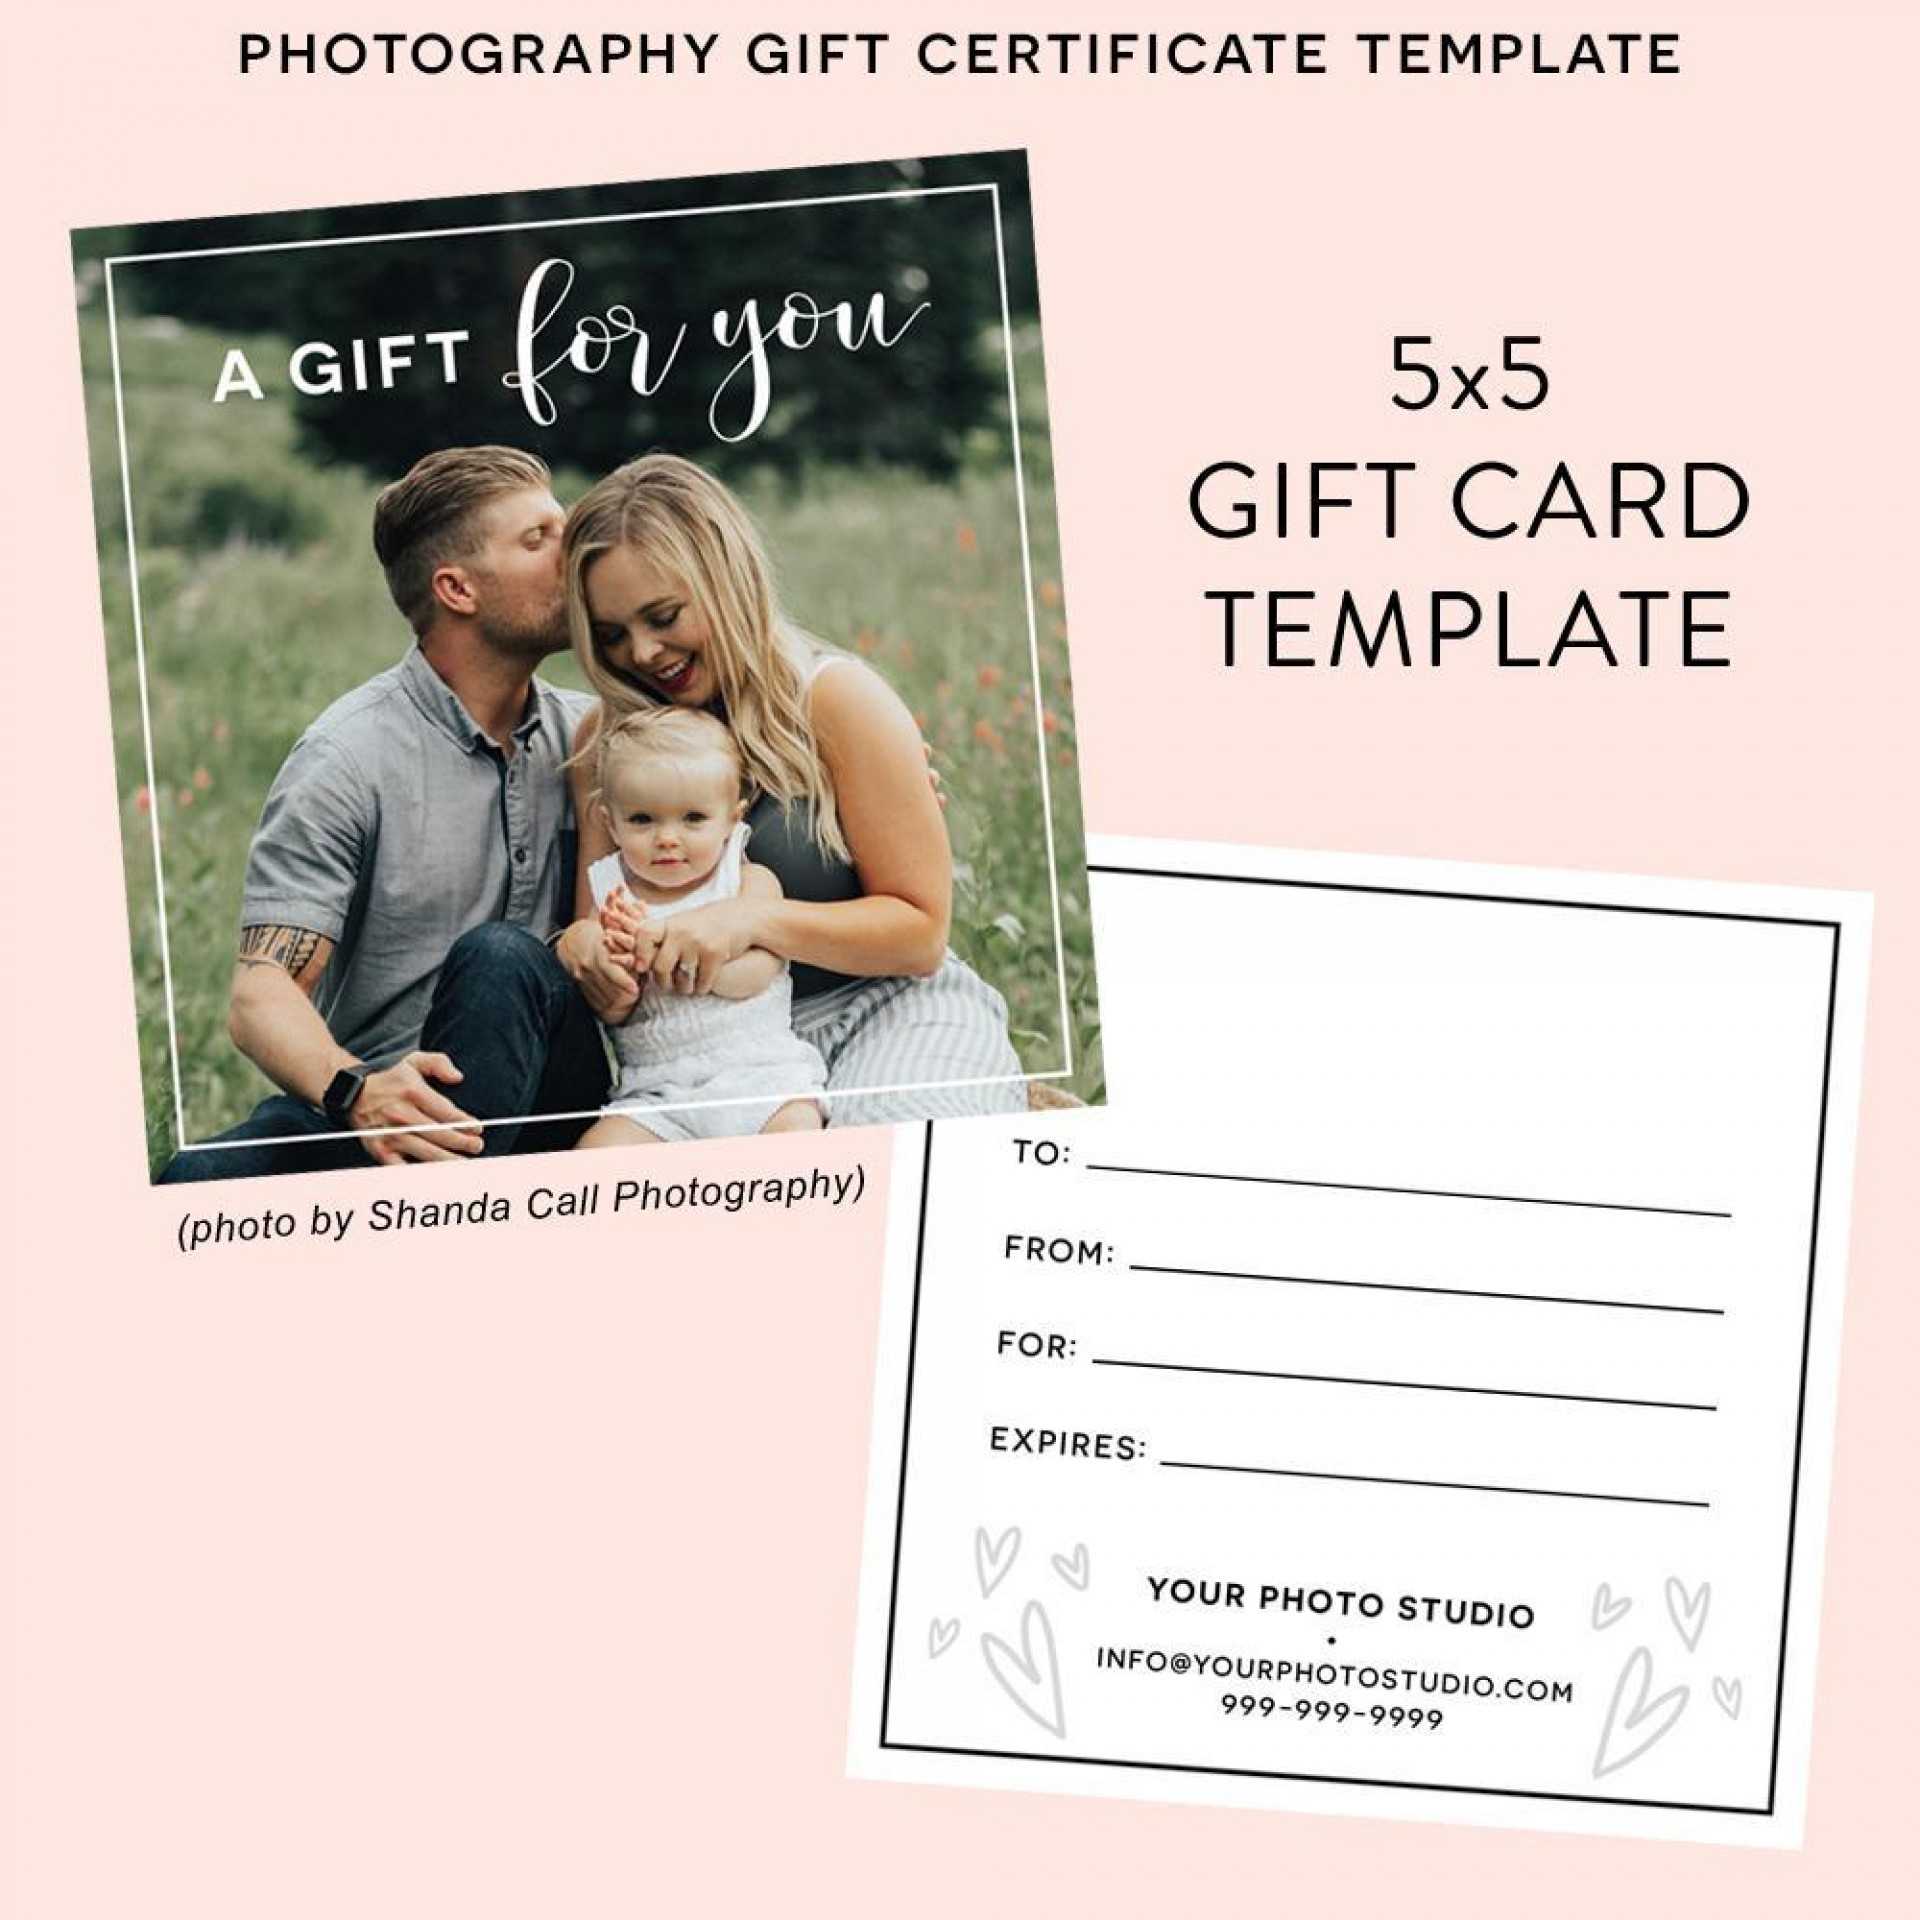 038 Photography Gift Certificate Template Photoshop Free Intended For Gift Certificate Template Photoshop